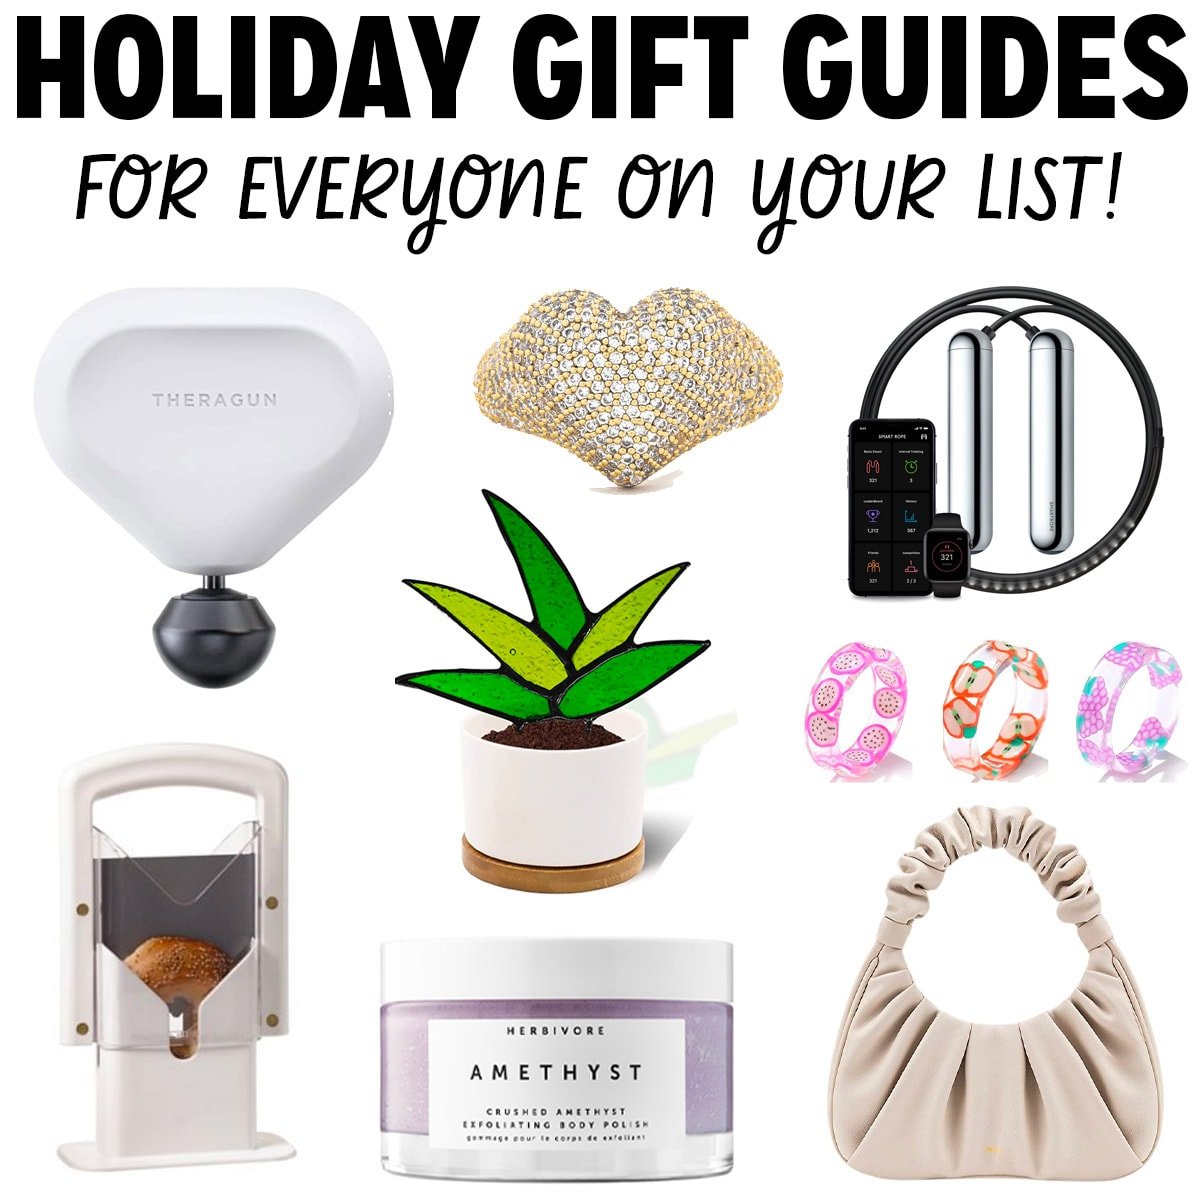 Our Top 10 Favourite Holiday Gifts for 2022 - WaySpa